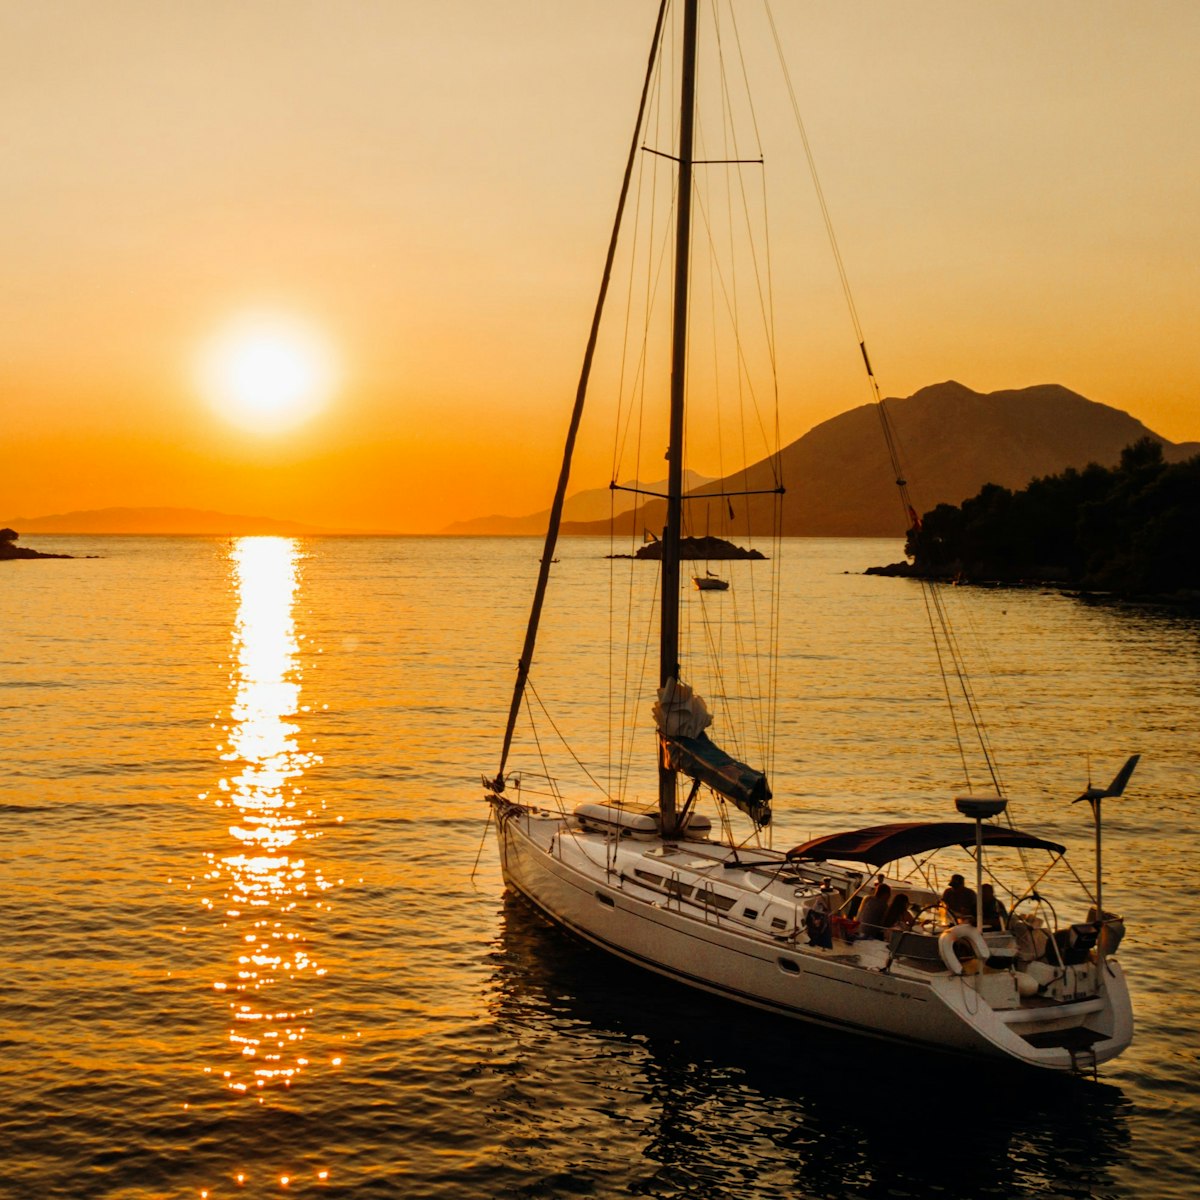 Discover the ultimate guide to boating for novices. From boat selection to ocean adventures, navigate with confidence and expertise.